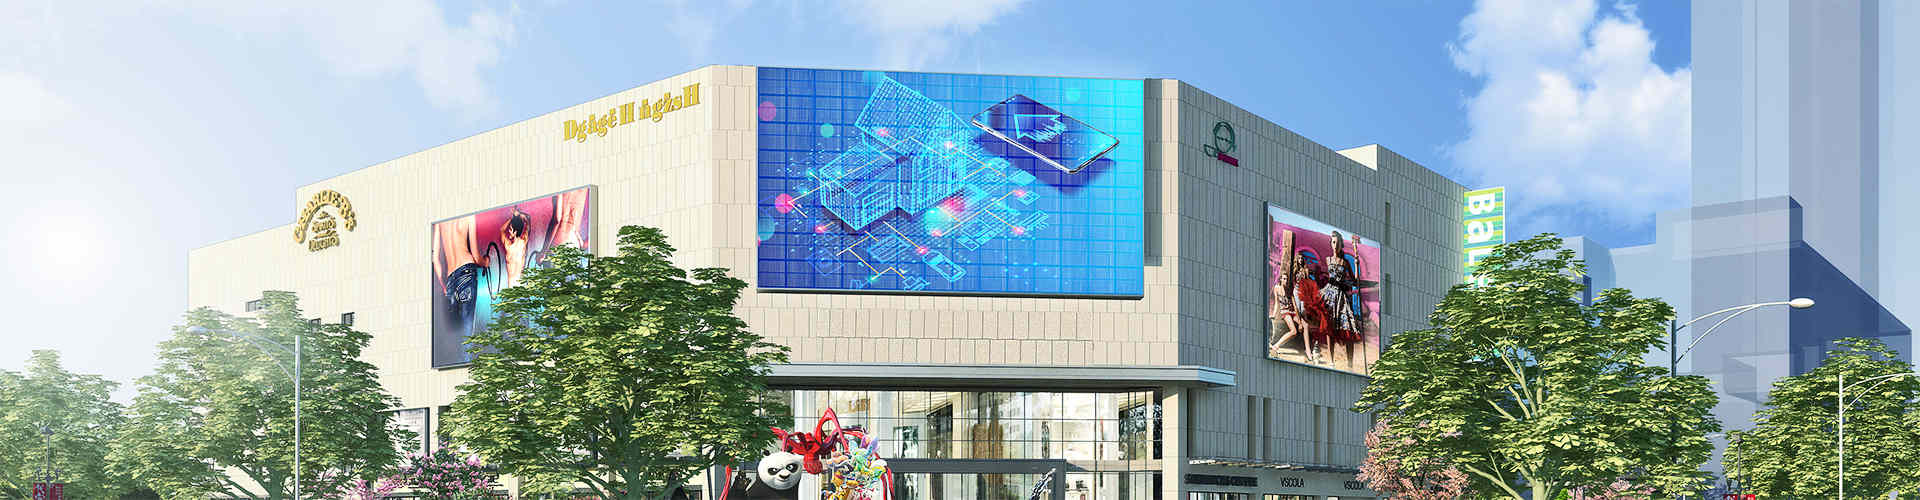 outdoor led glass wall display